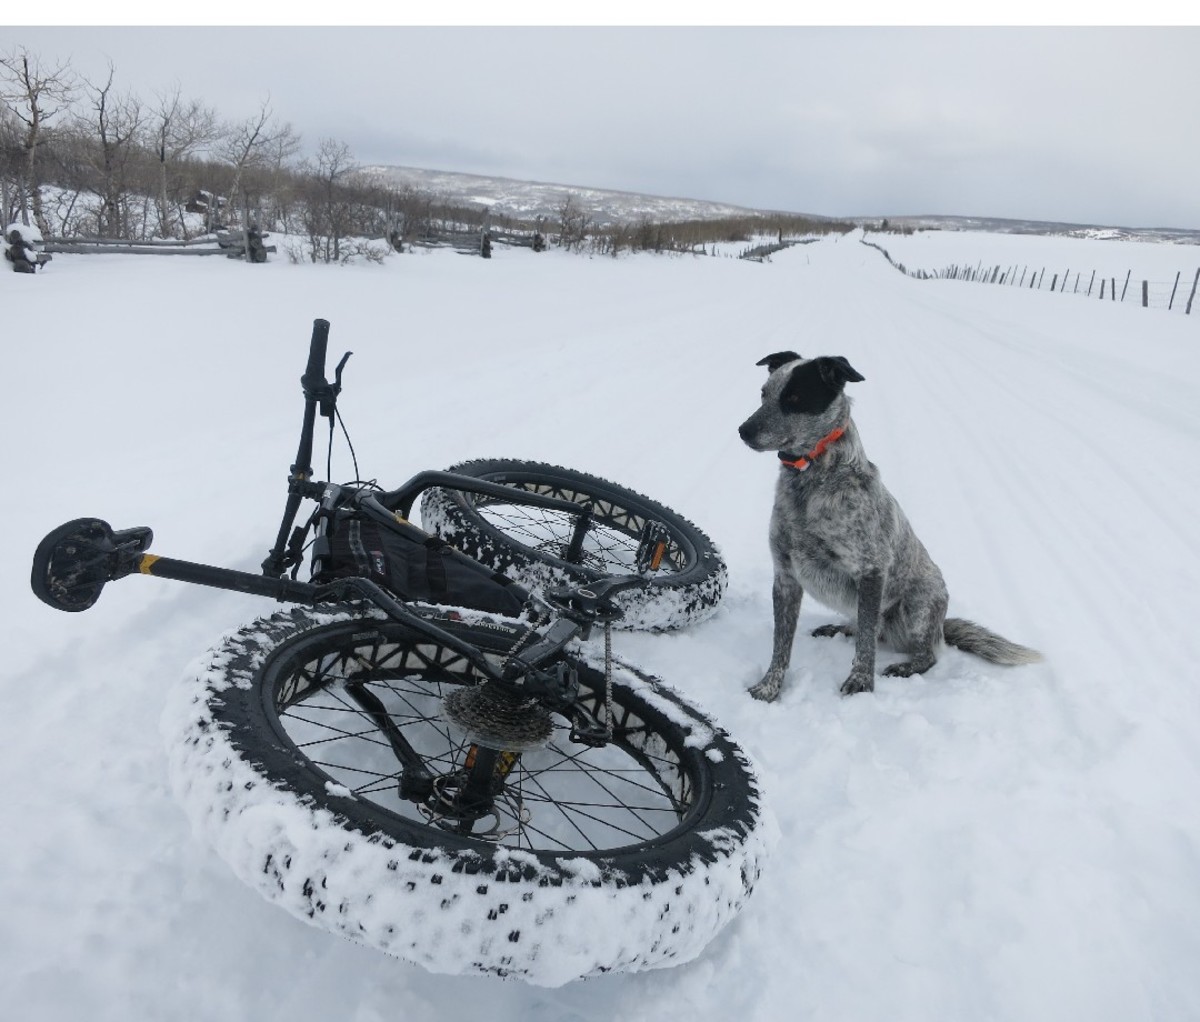 Border collie sits in the snow next to a fat bike along a snowy trail in the Southwestern Colorado's San Juan mountain range near the town of Ridgeway.